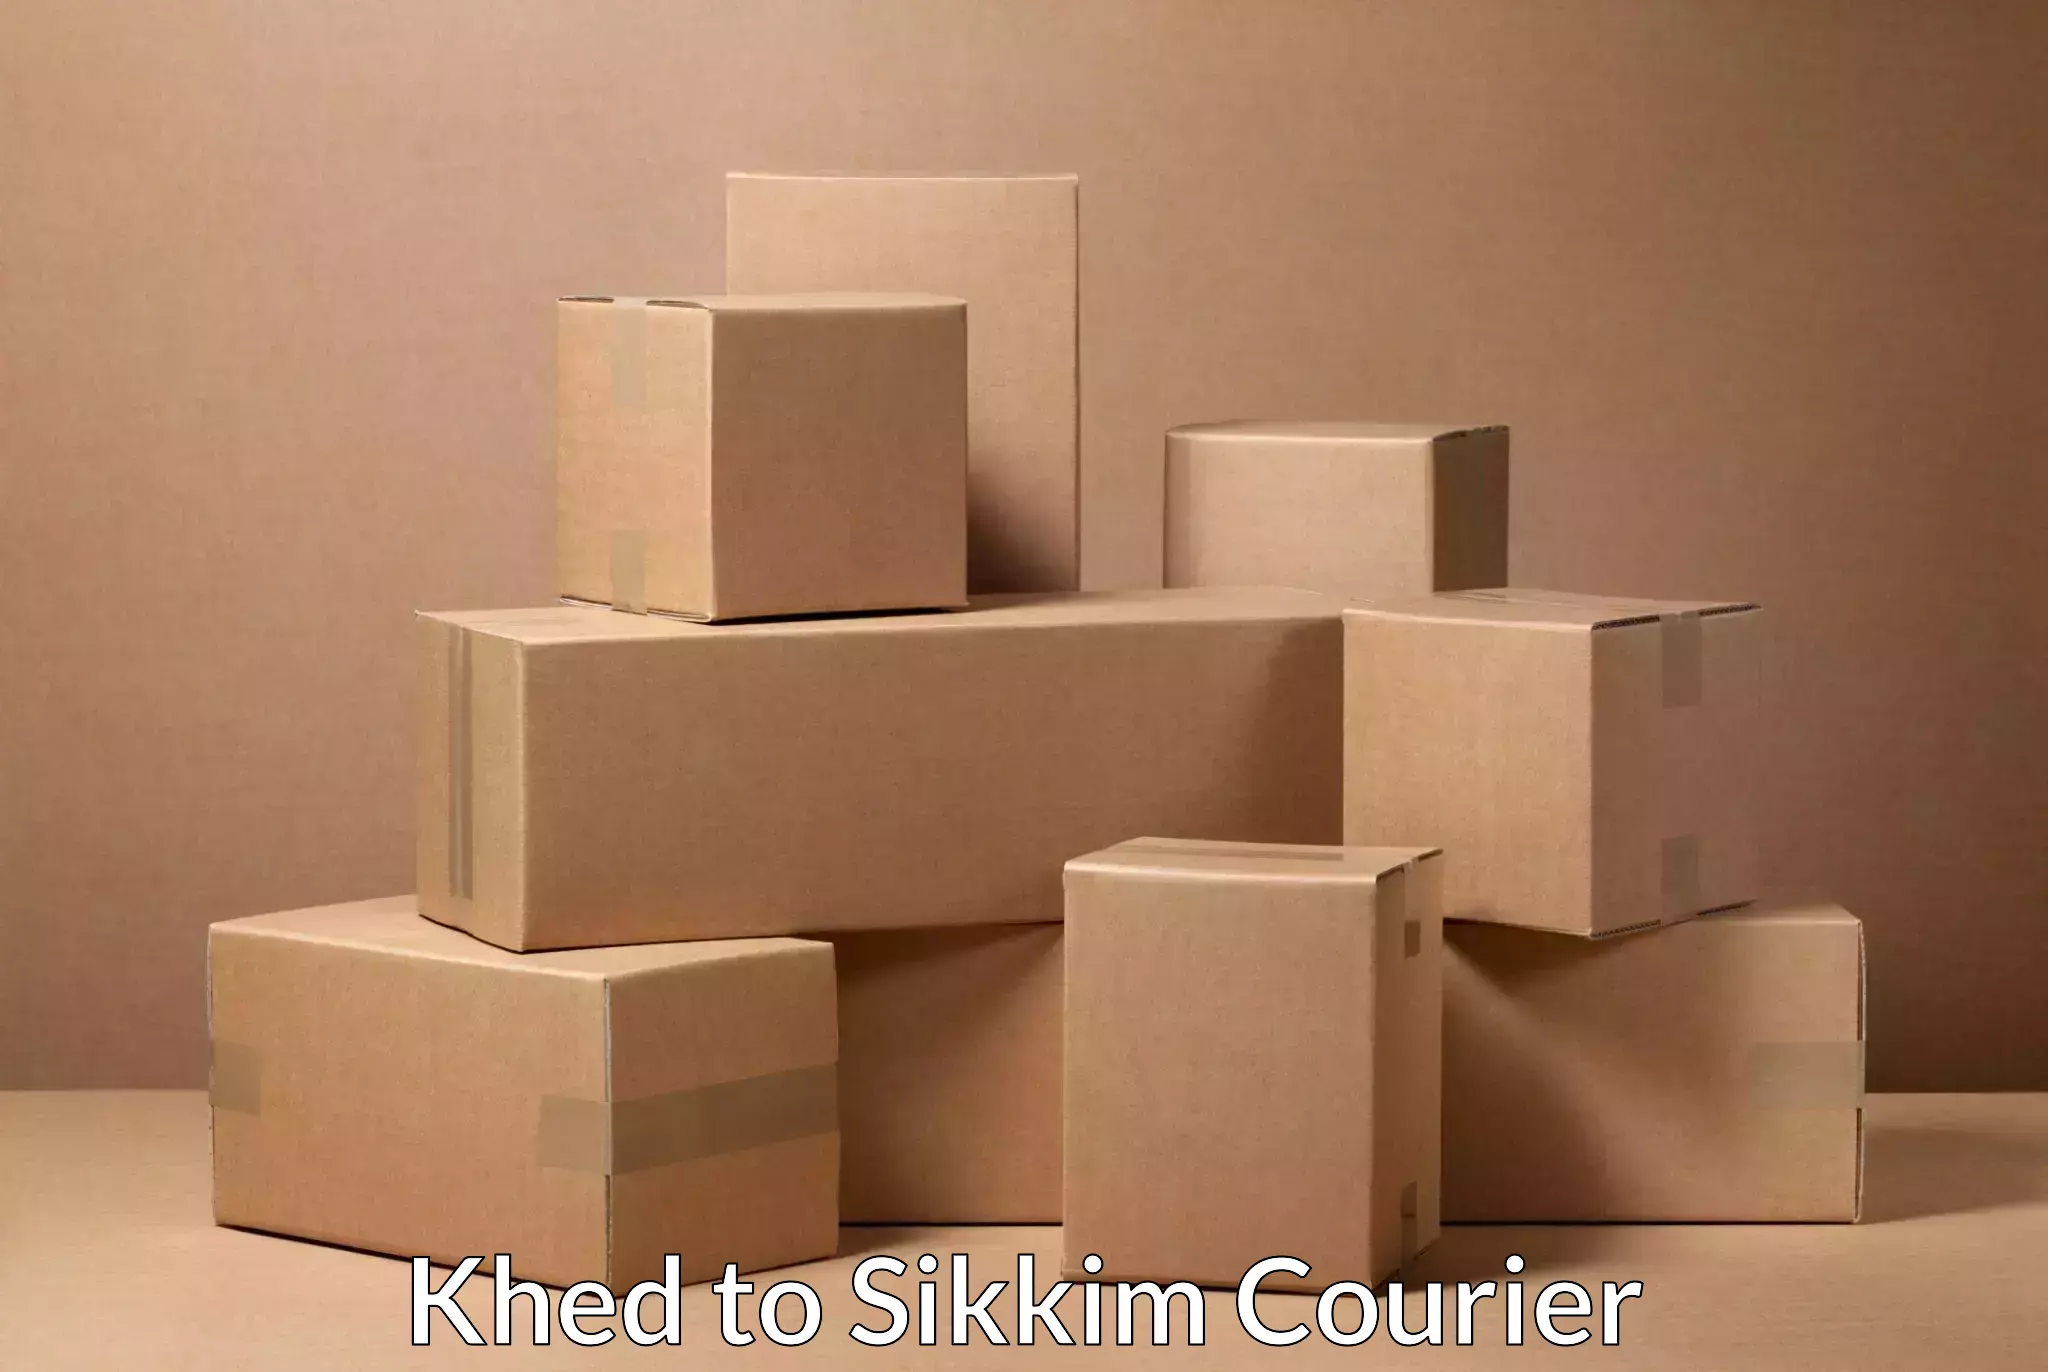 Nationwide shipping coverage Khed to South Sikkim